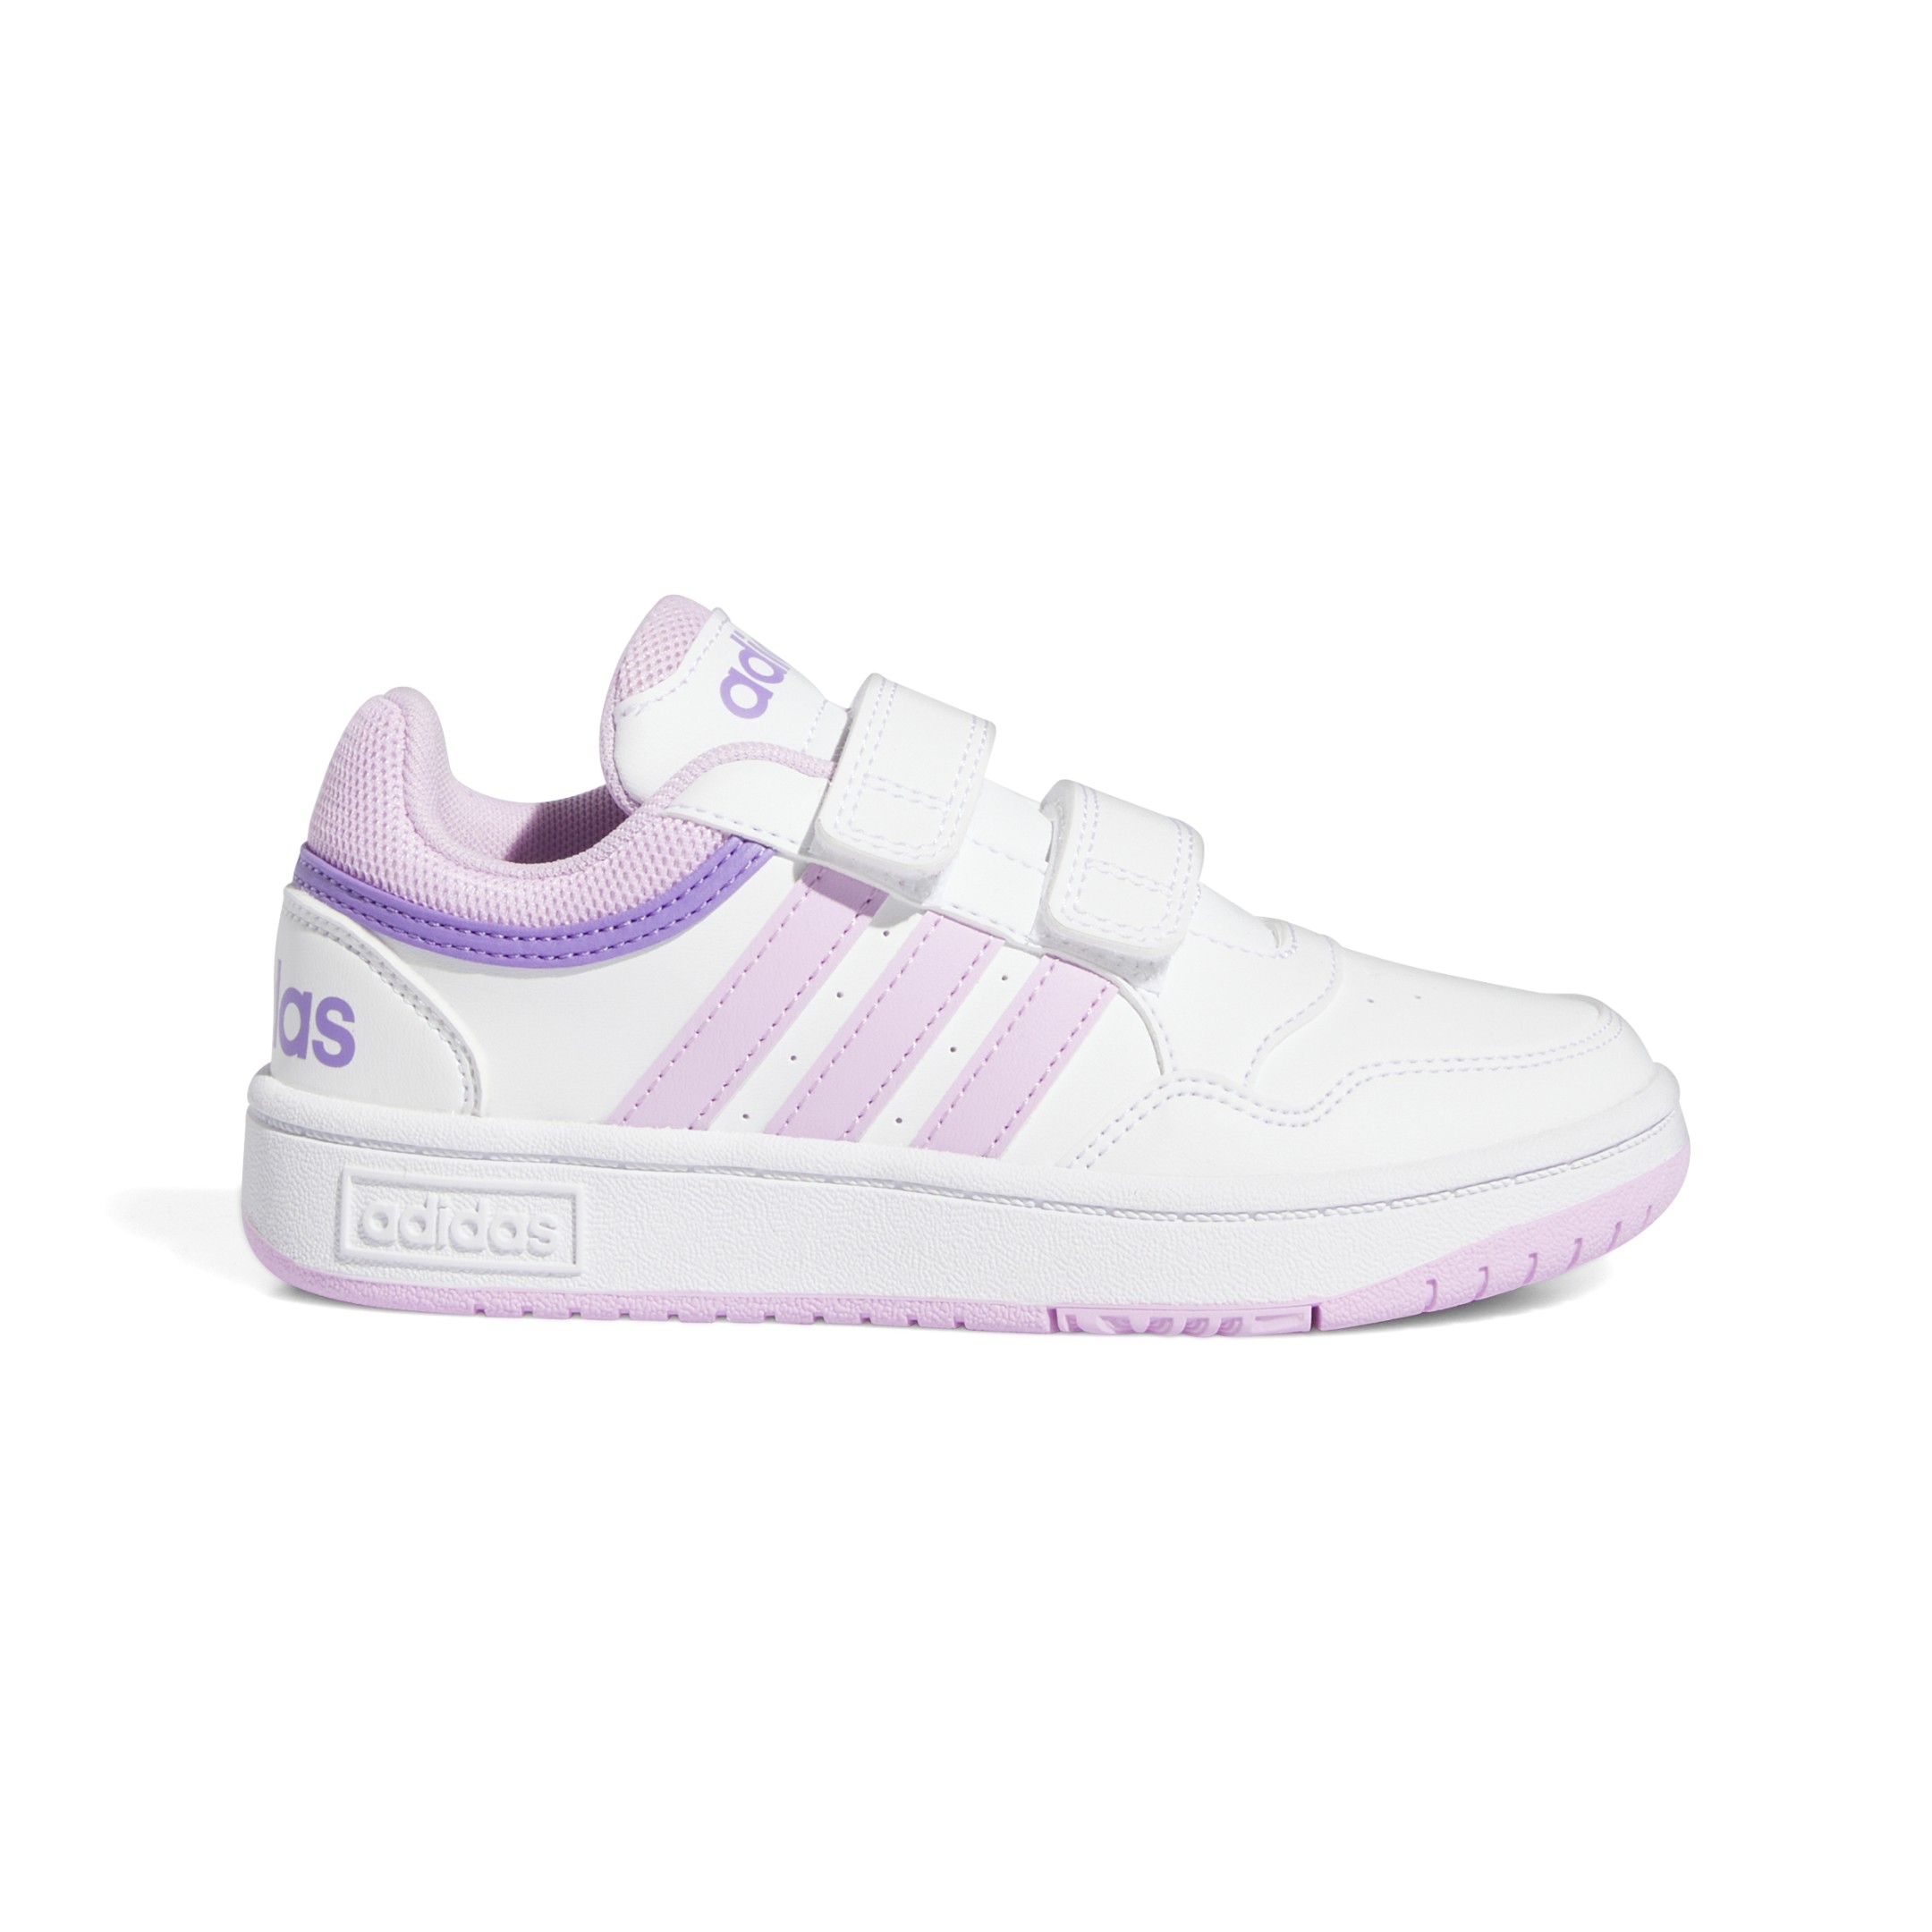 DEPORTIVO HOOPS 3.0 CF C CLOUD WHITE / BLISS LILAC / VIOLET FUSION